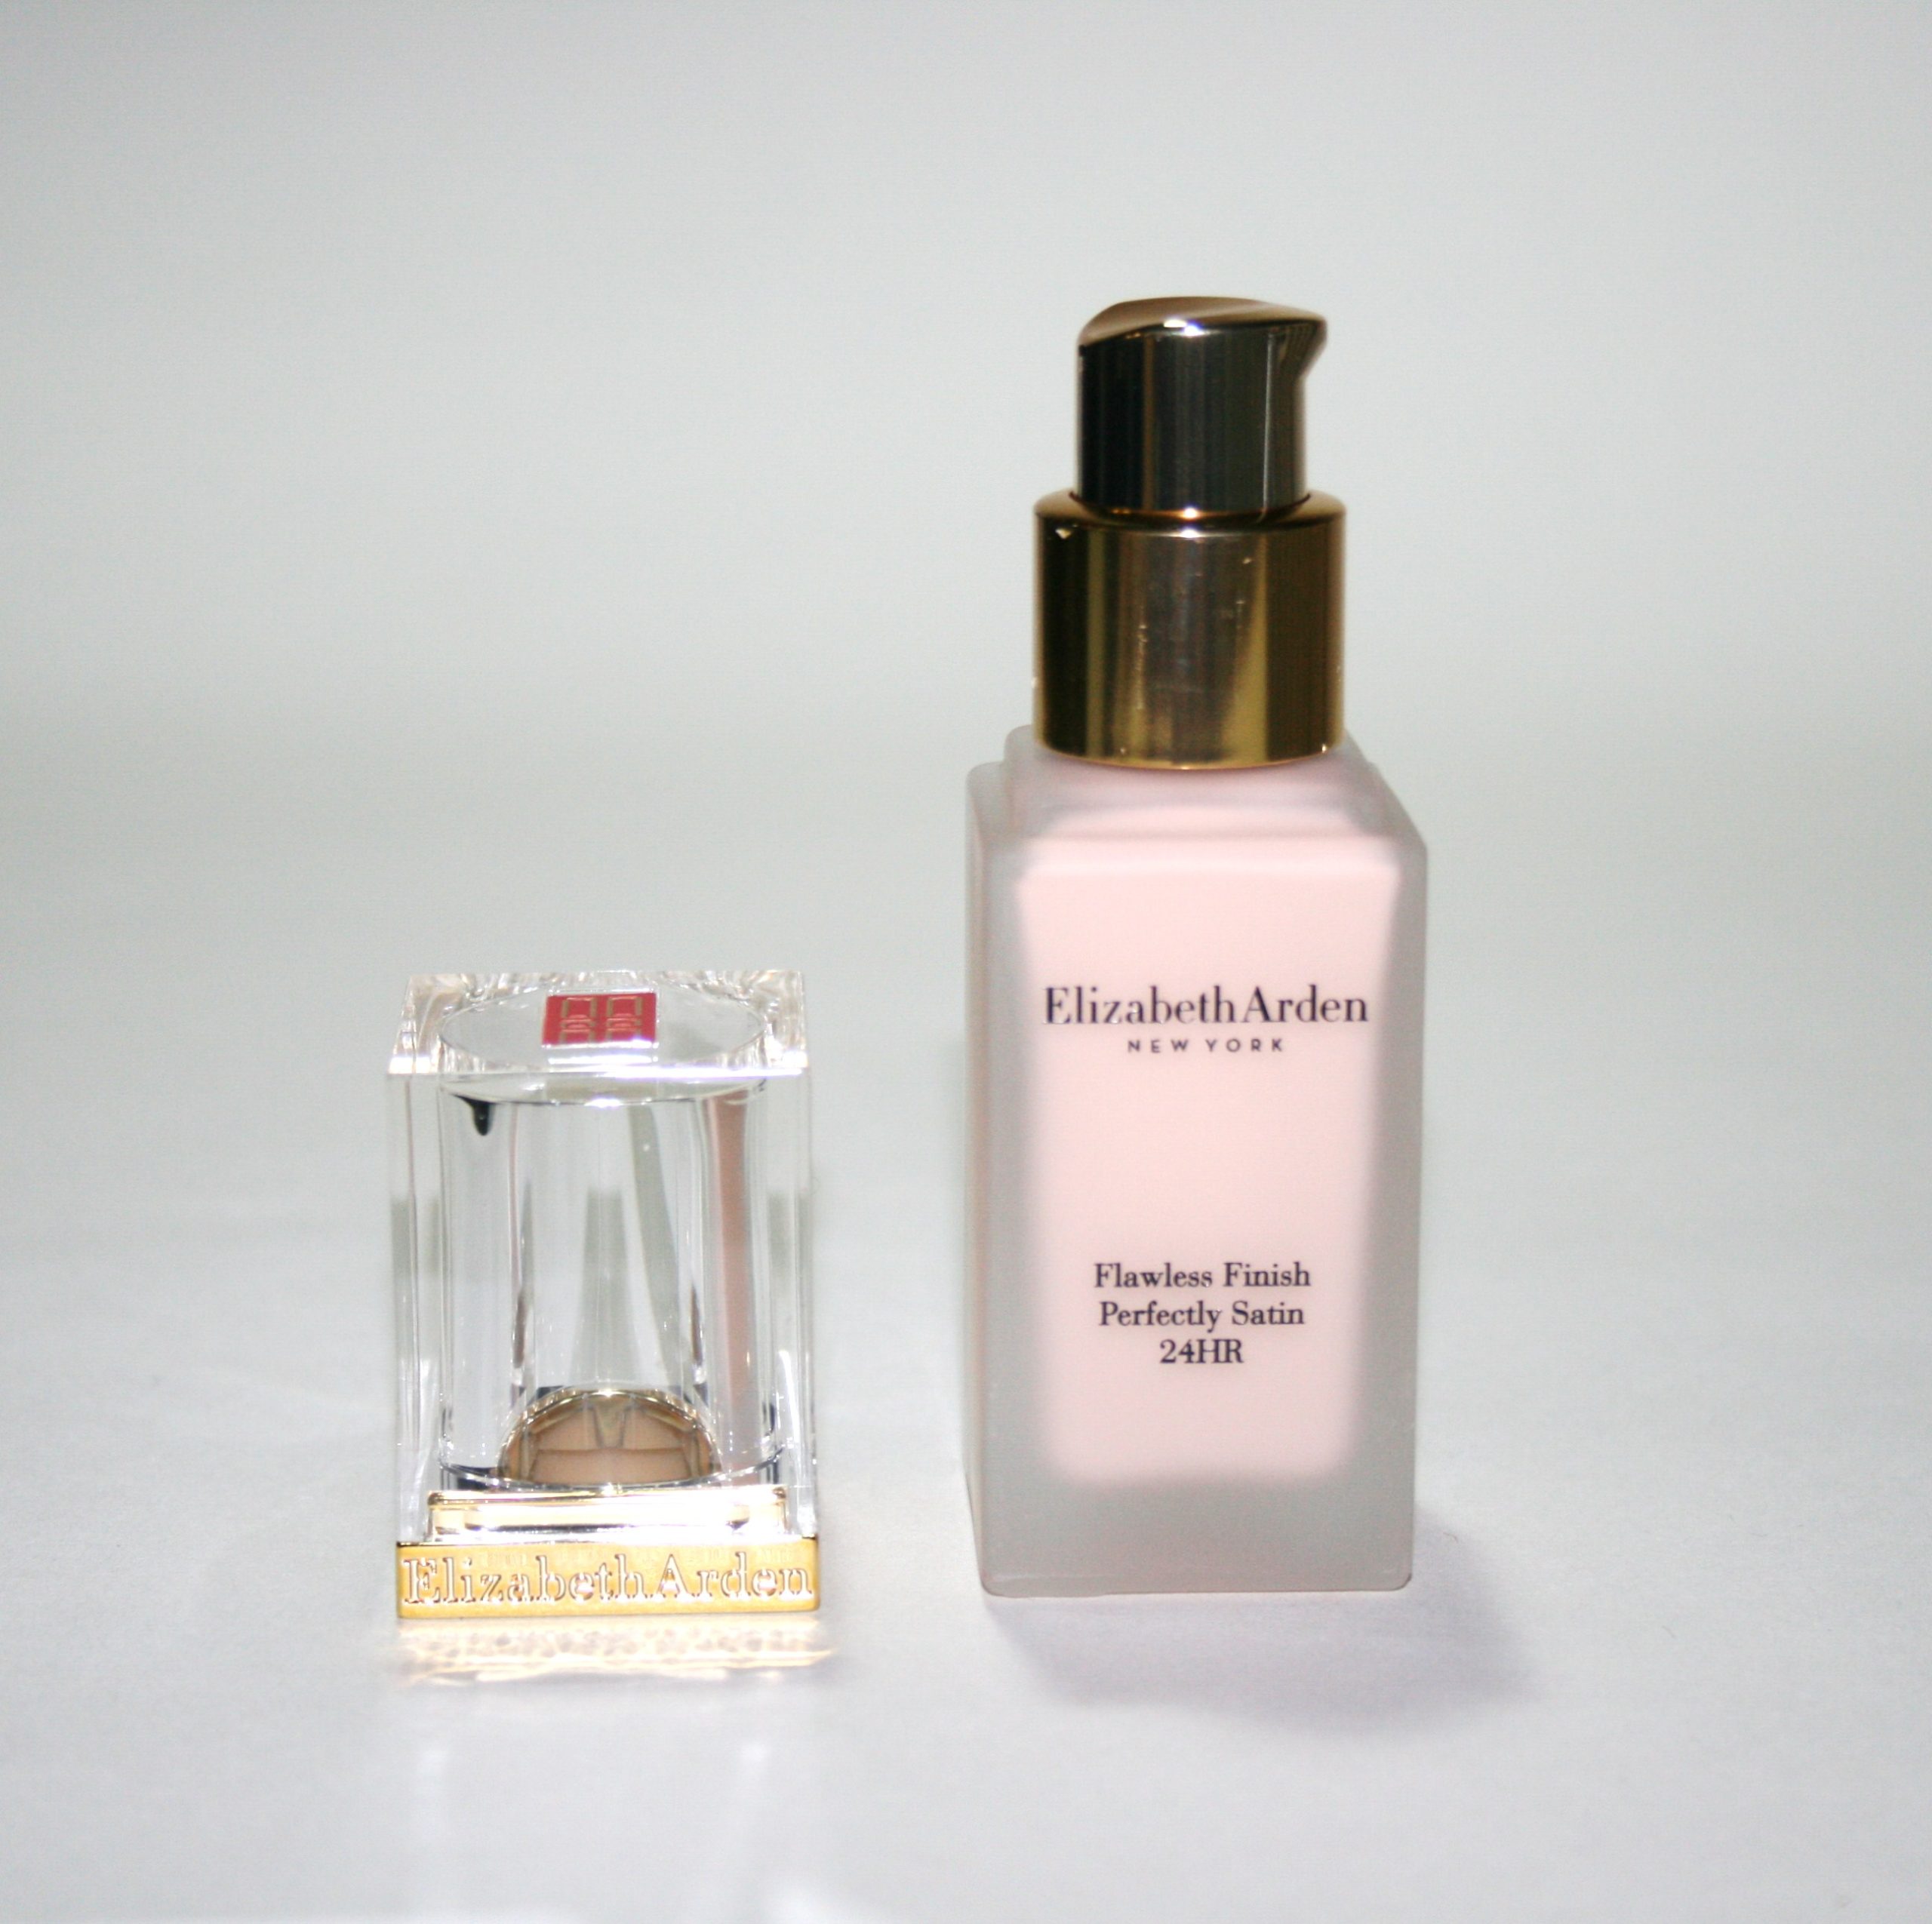 Elizabeth Arden Flawless Finish Perfectly Satin 24HR Makeup SPF15